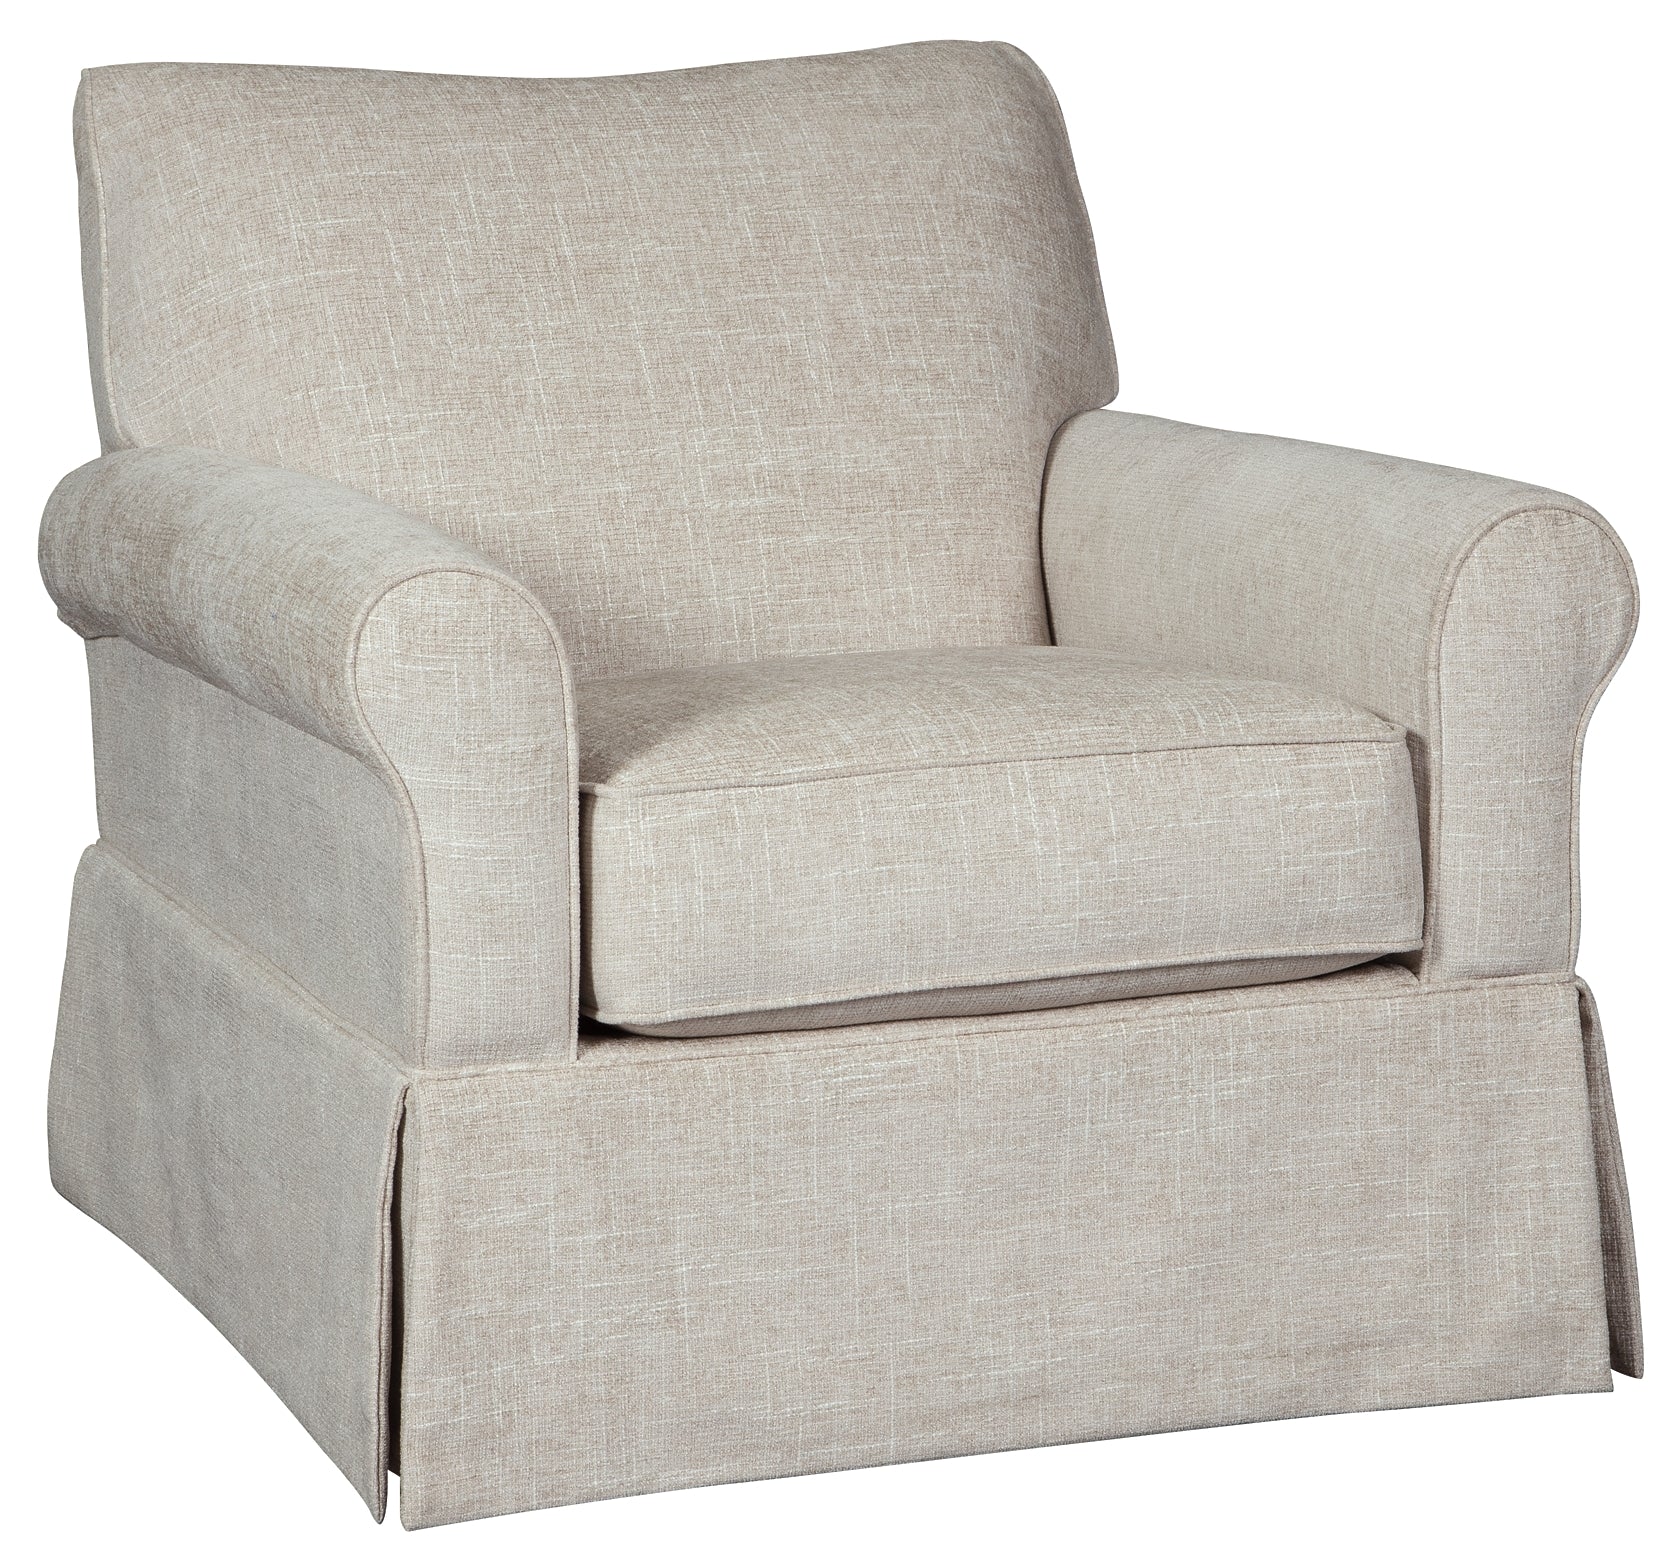 Searcy Swivel Glider Accent Chair JB's Furniture  Home Furniture, Home Decor, Furniture Store